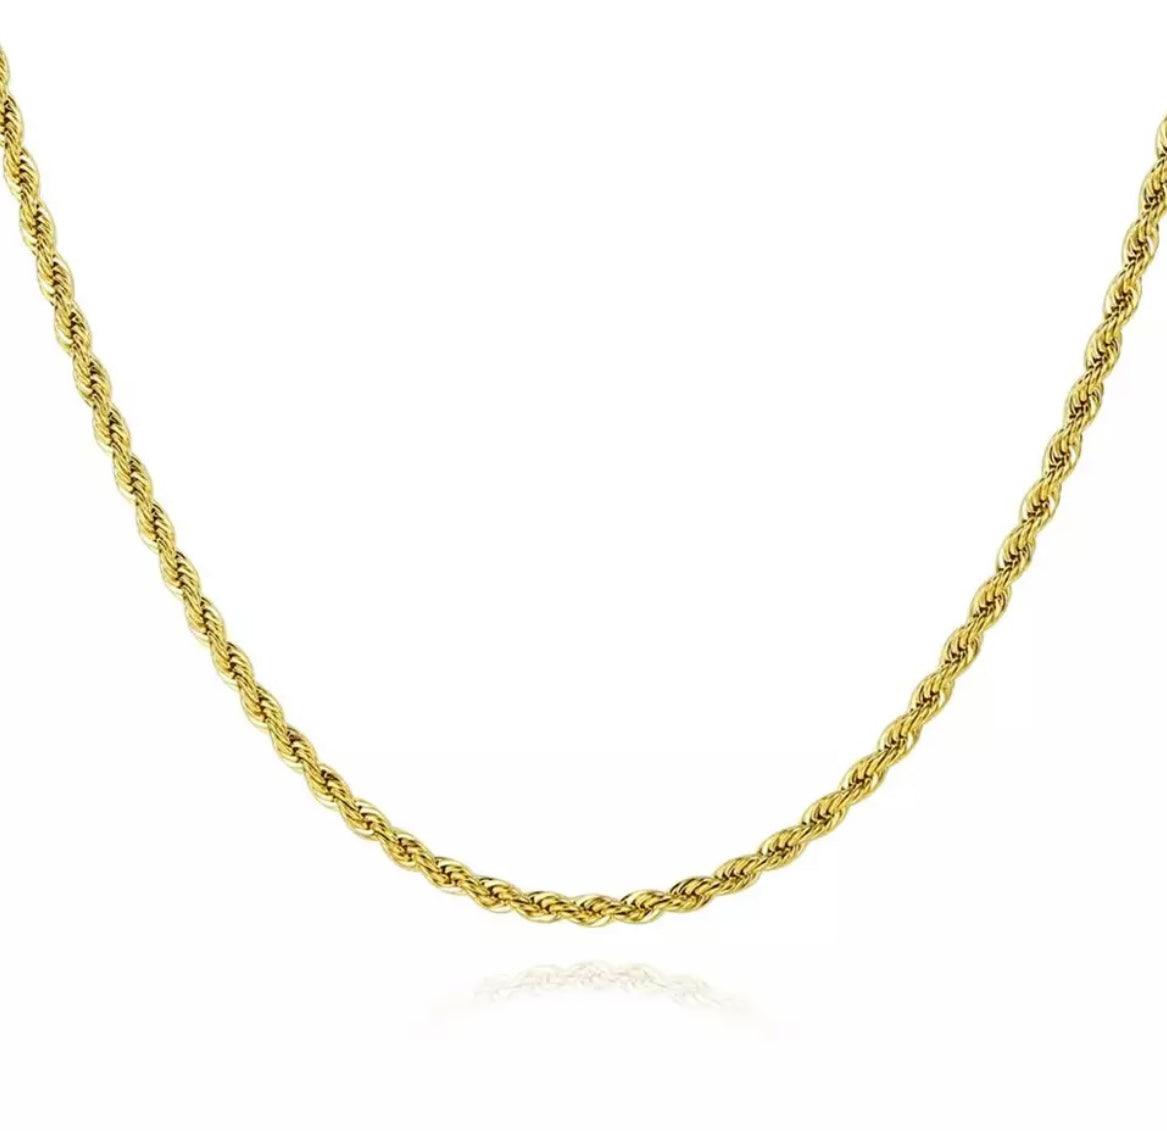 Gold -Plated Chain | Rope Chain Necklace | AriJah's BOX